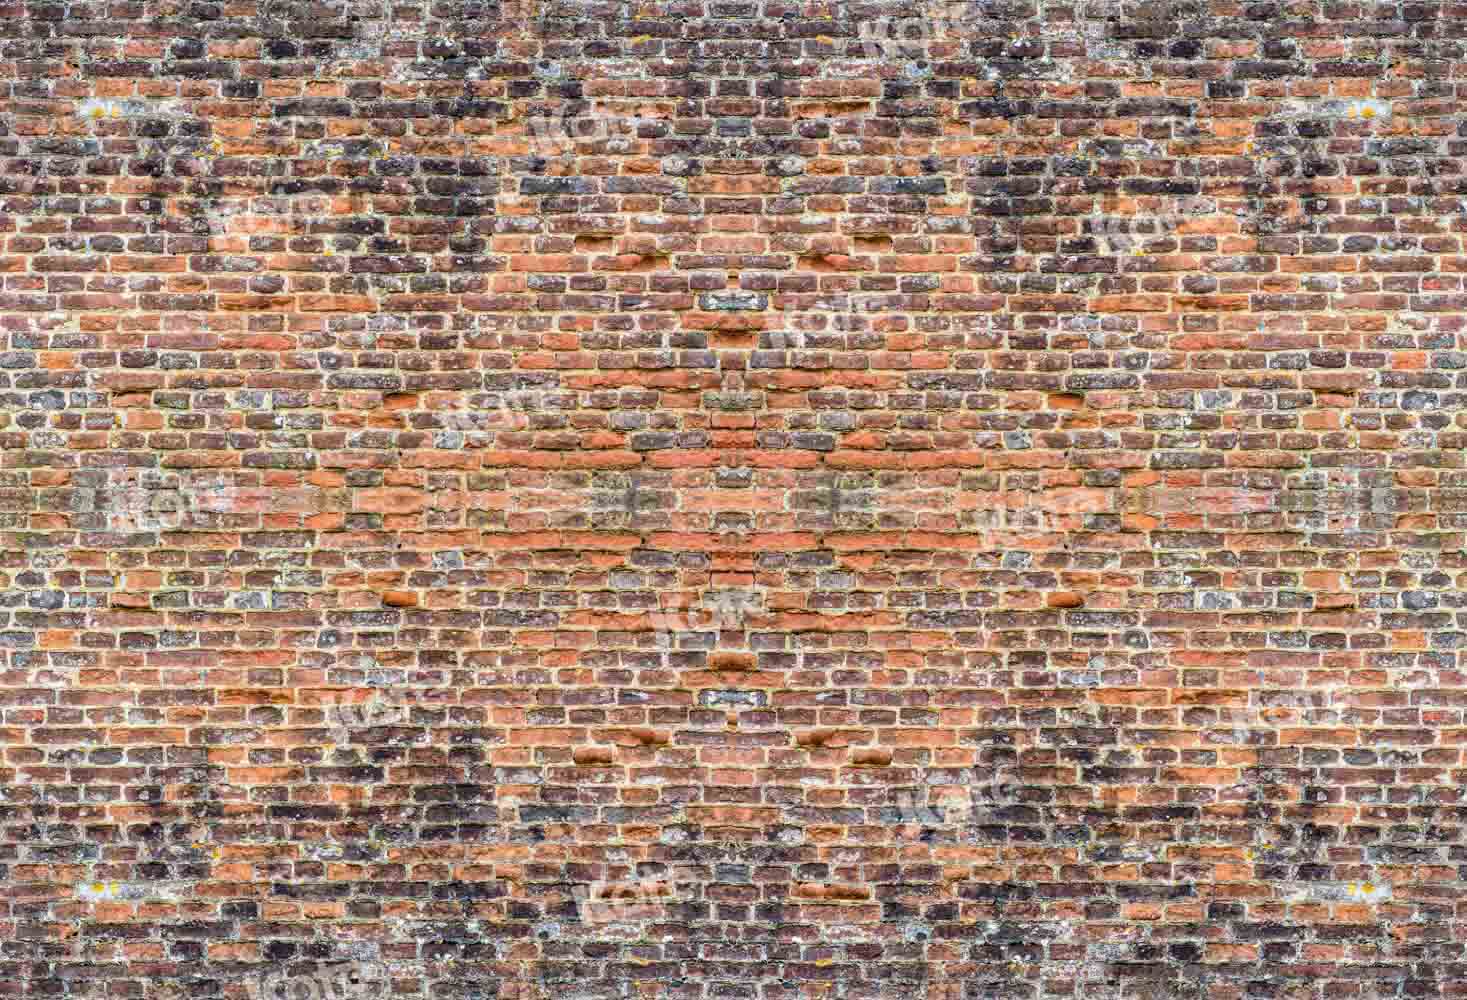 Kate Retro Old Brick Background for Photography Designed by Chain Photography